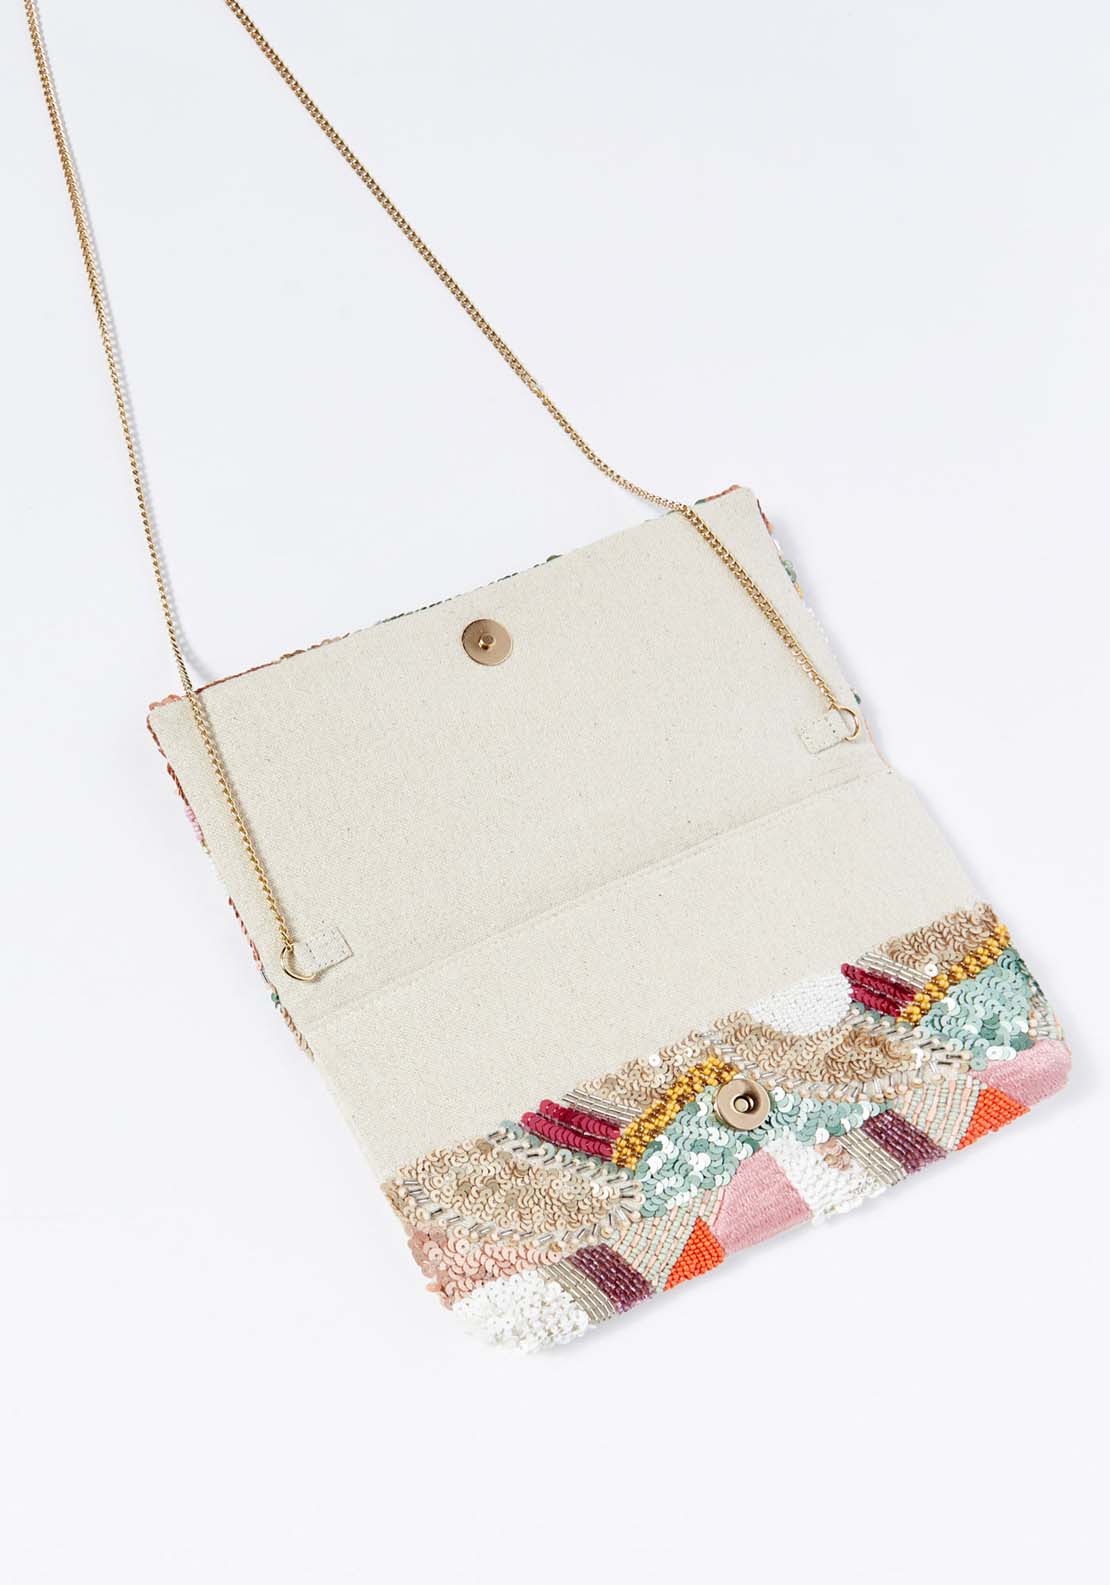 Sfera Beads abstract envelope bag 3 Shaws Department Stores